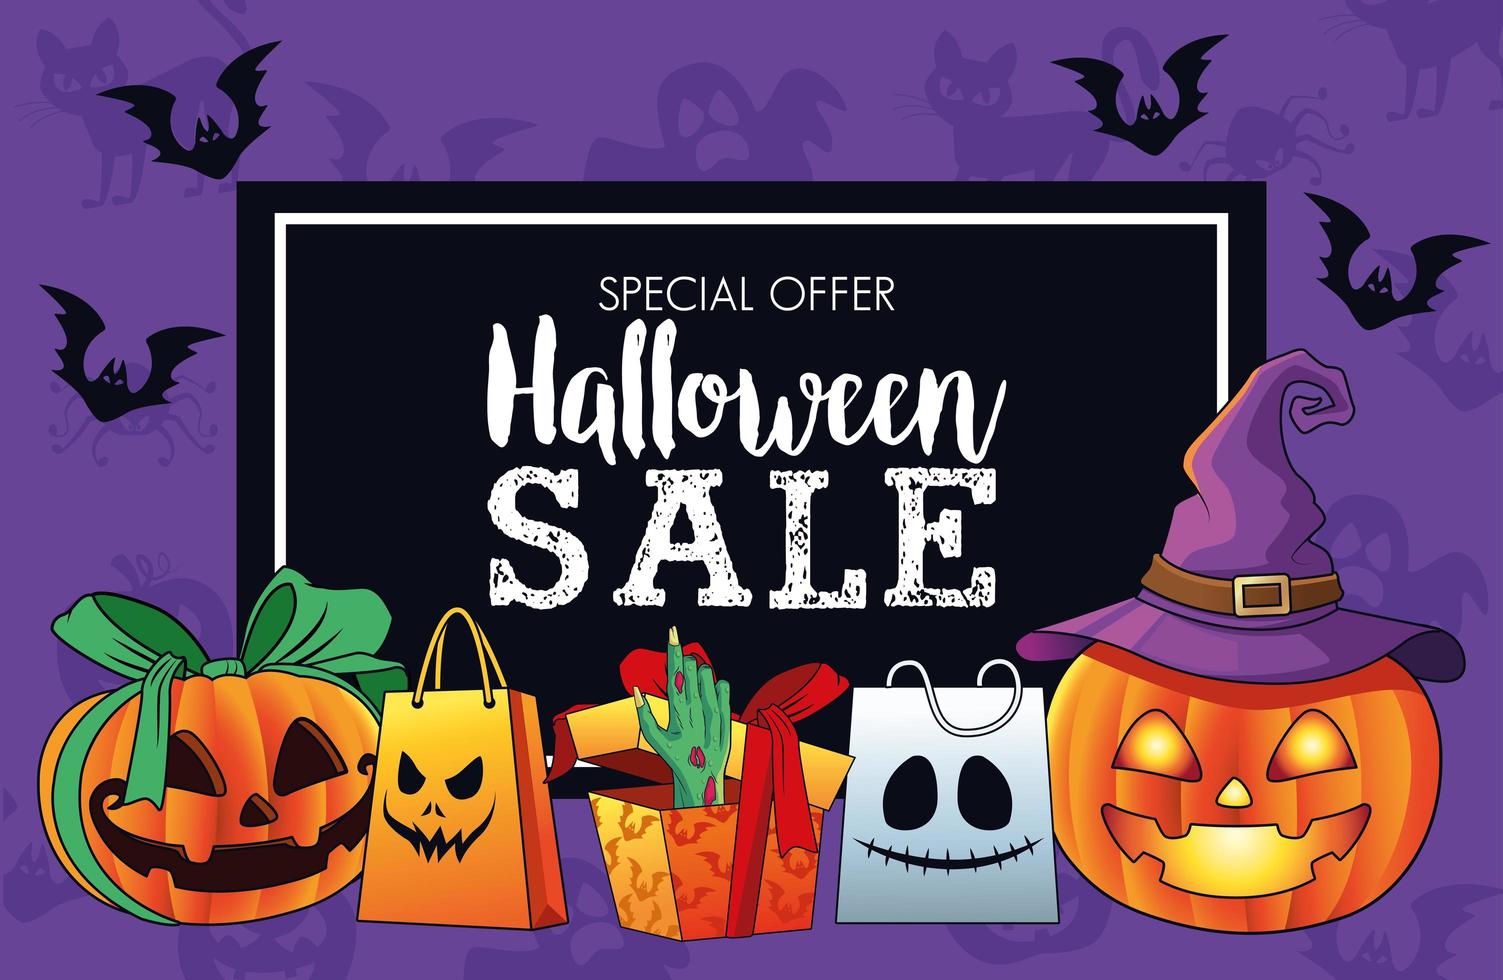 halloween sale seasonal poster with death hand coming out of gift and pumpkins vector